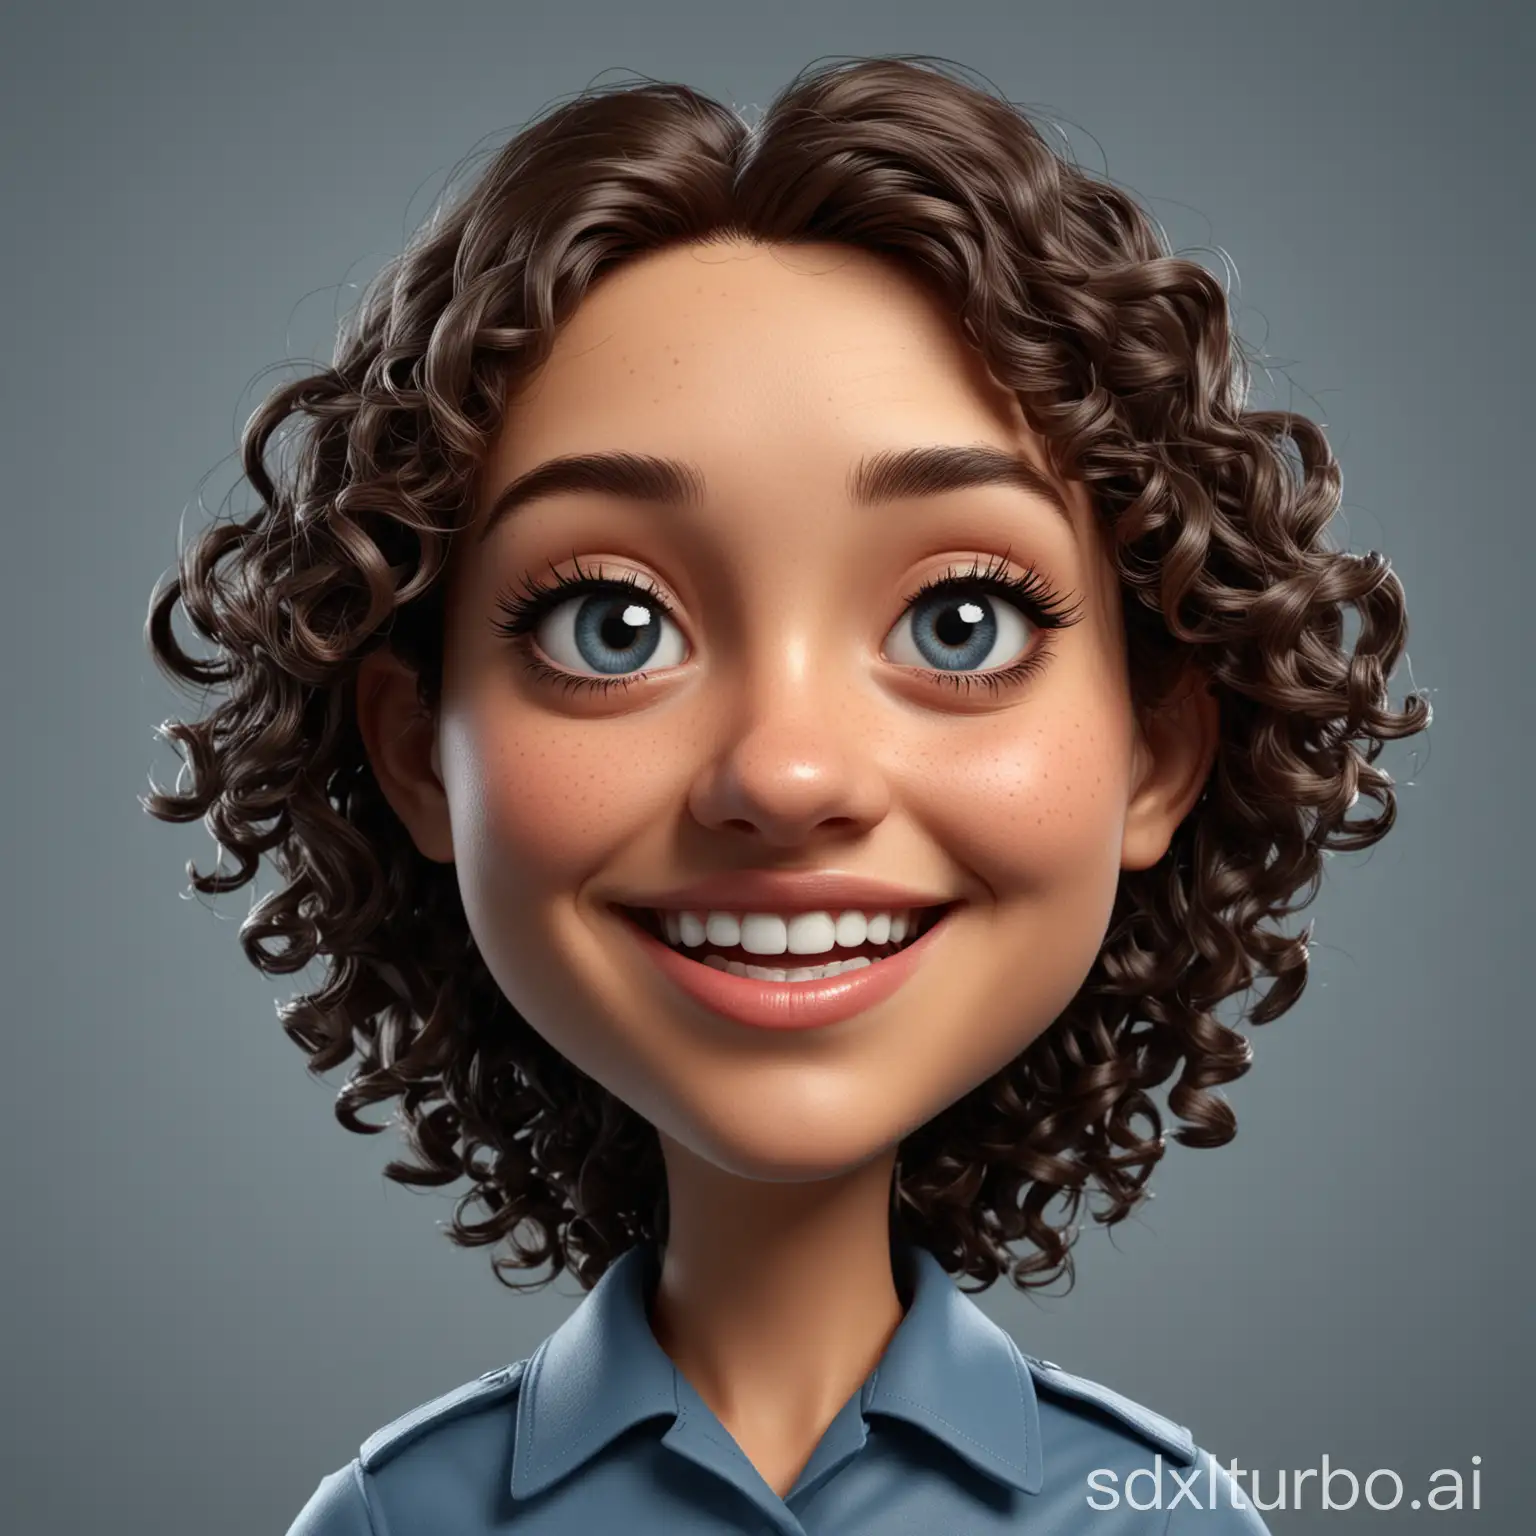 Realistic-3D-Cartoon-Style-Portrait-of-a-CurlyHaired-Female-in-Blue-Uniform